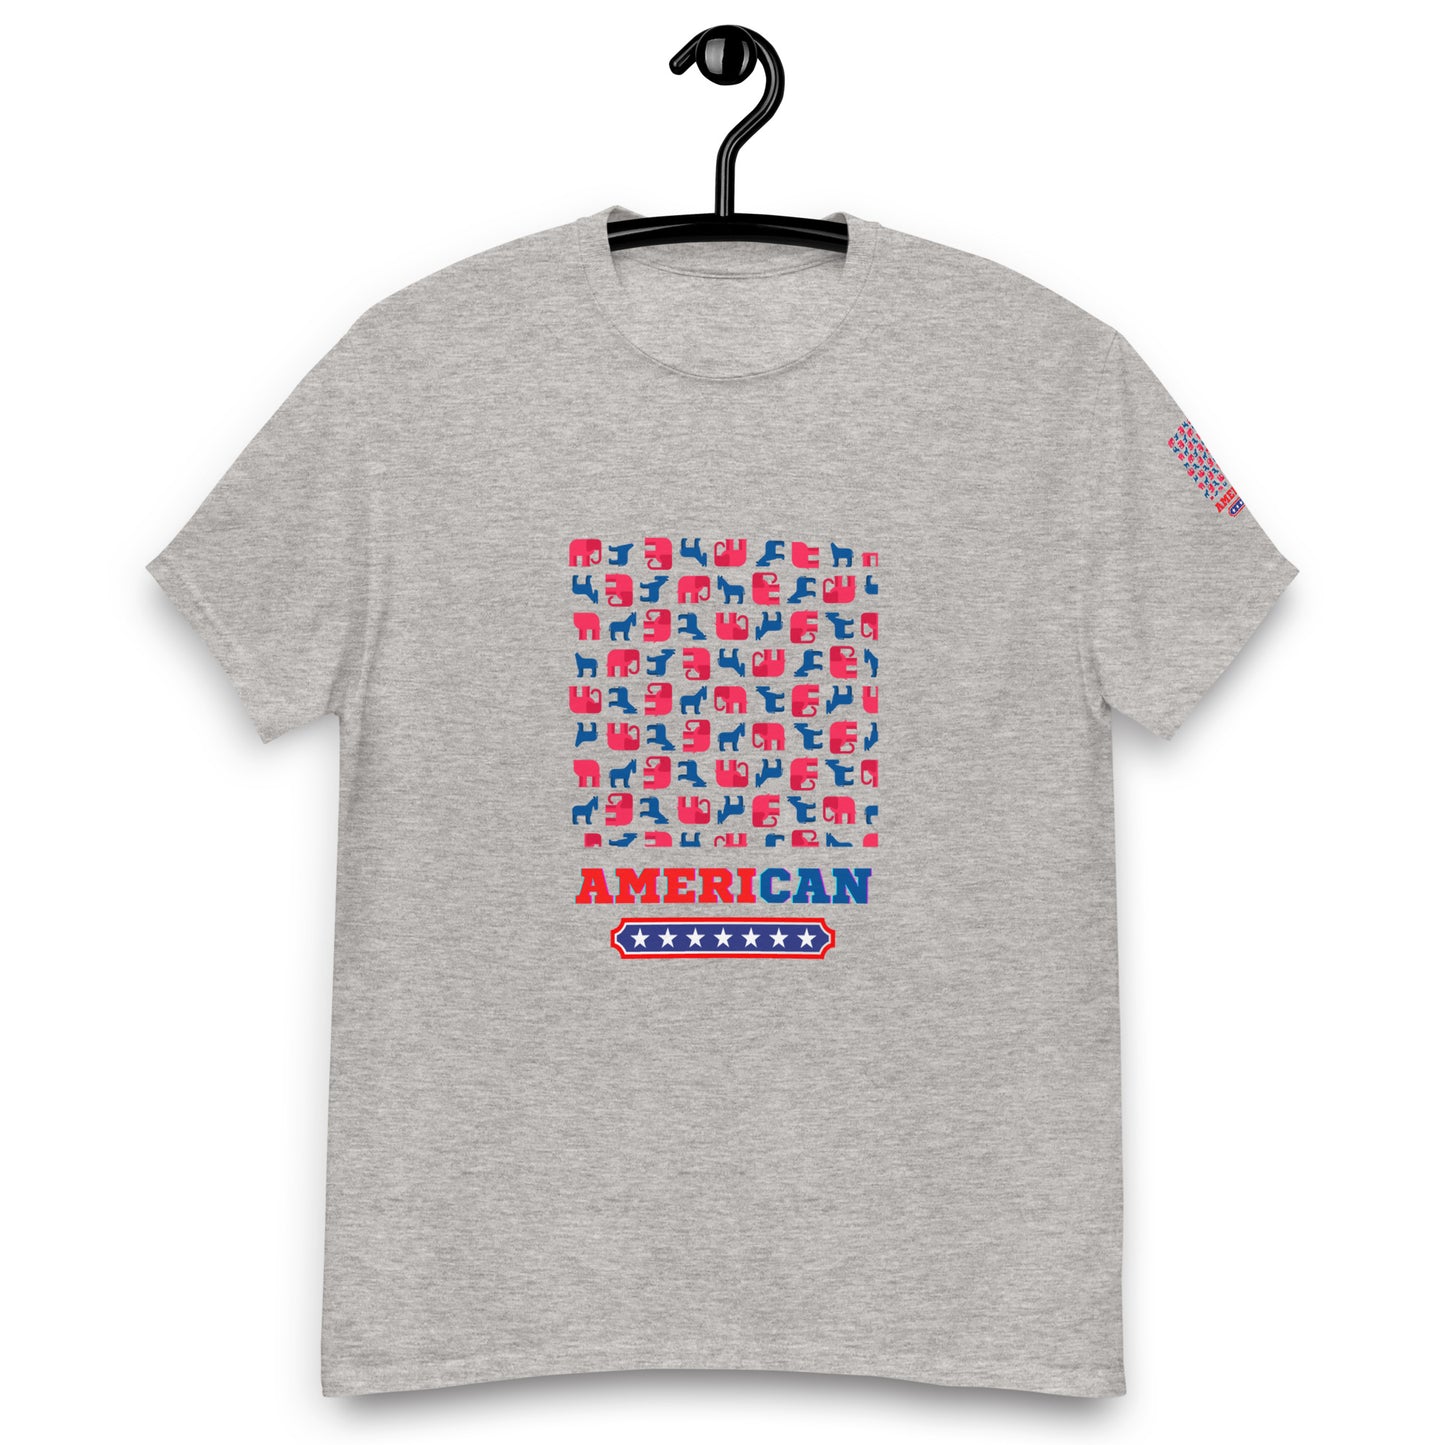 AMERICAN STYLE T–SHIRT "ELEPHANT - THEMED" GREY FRONT - www.firstamericanstore.com